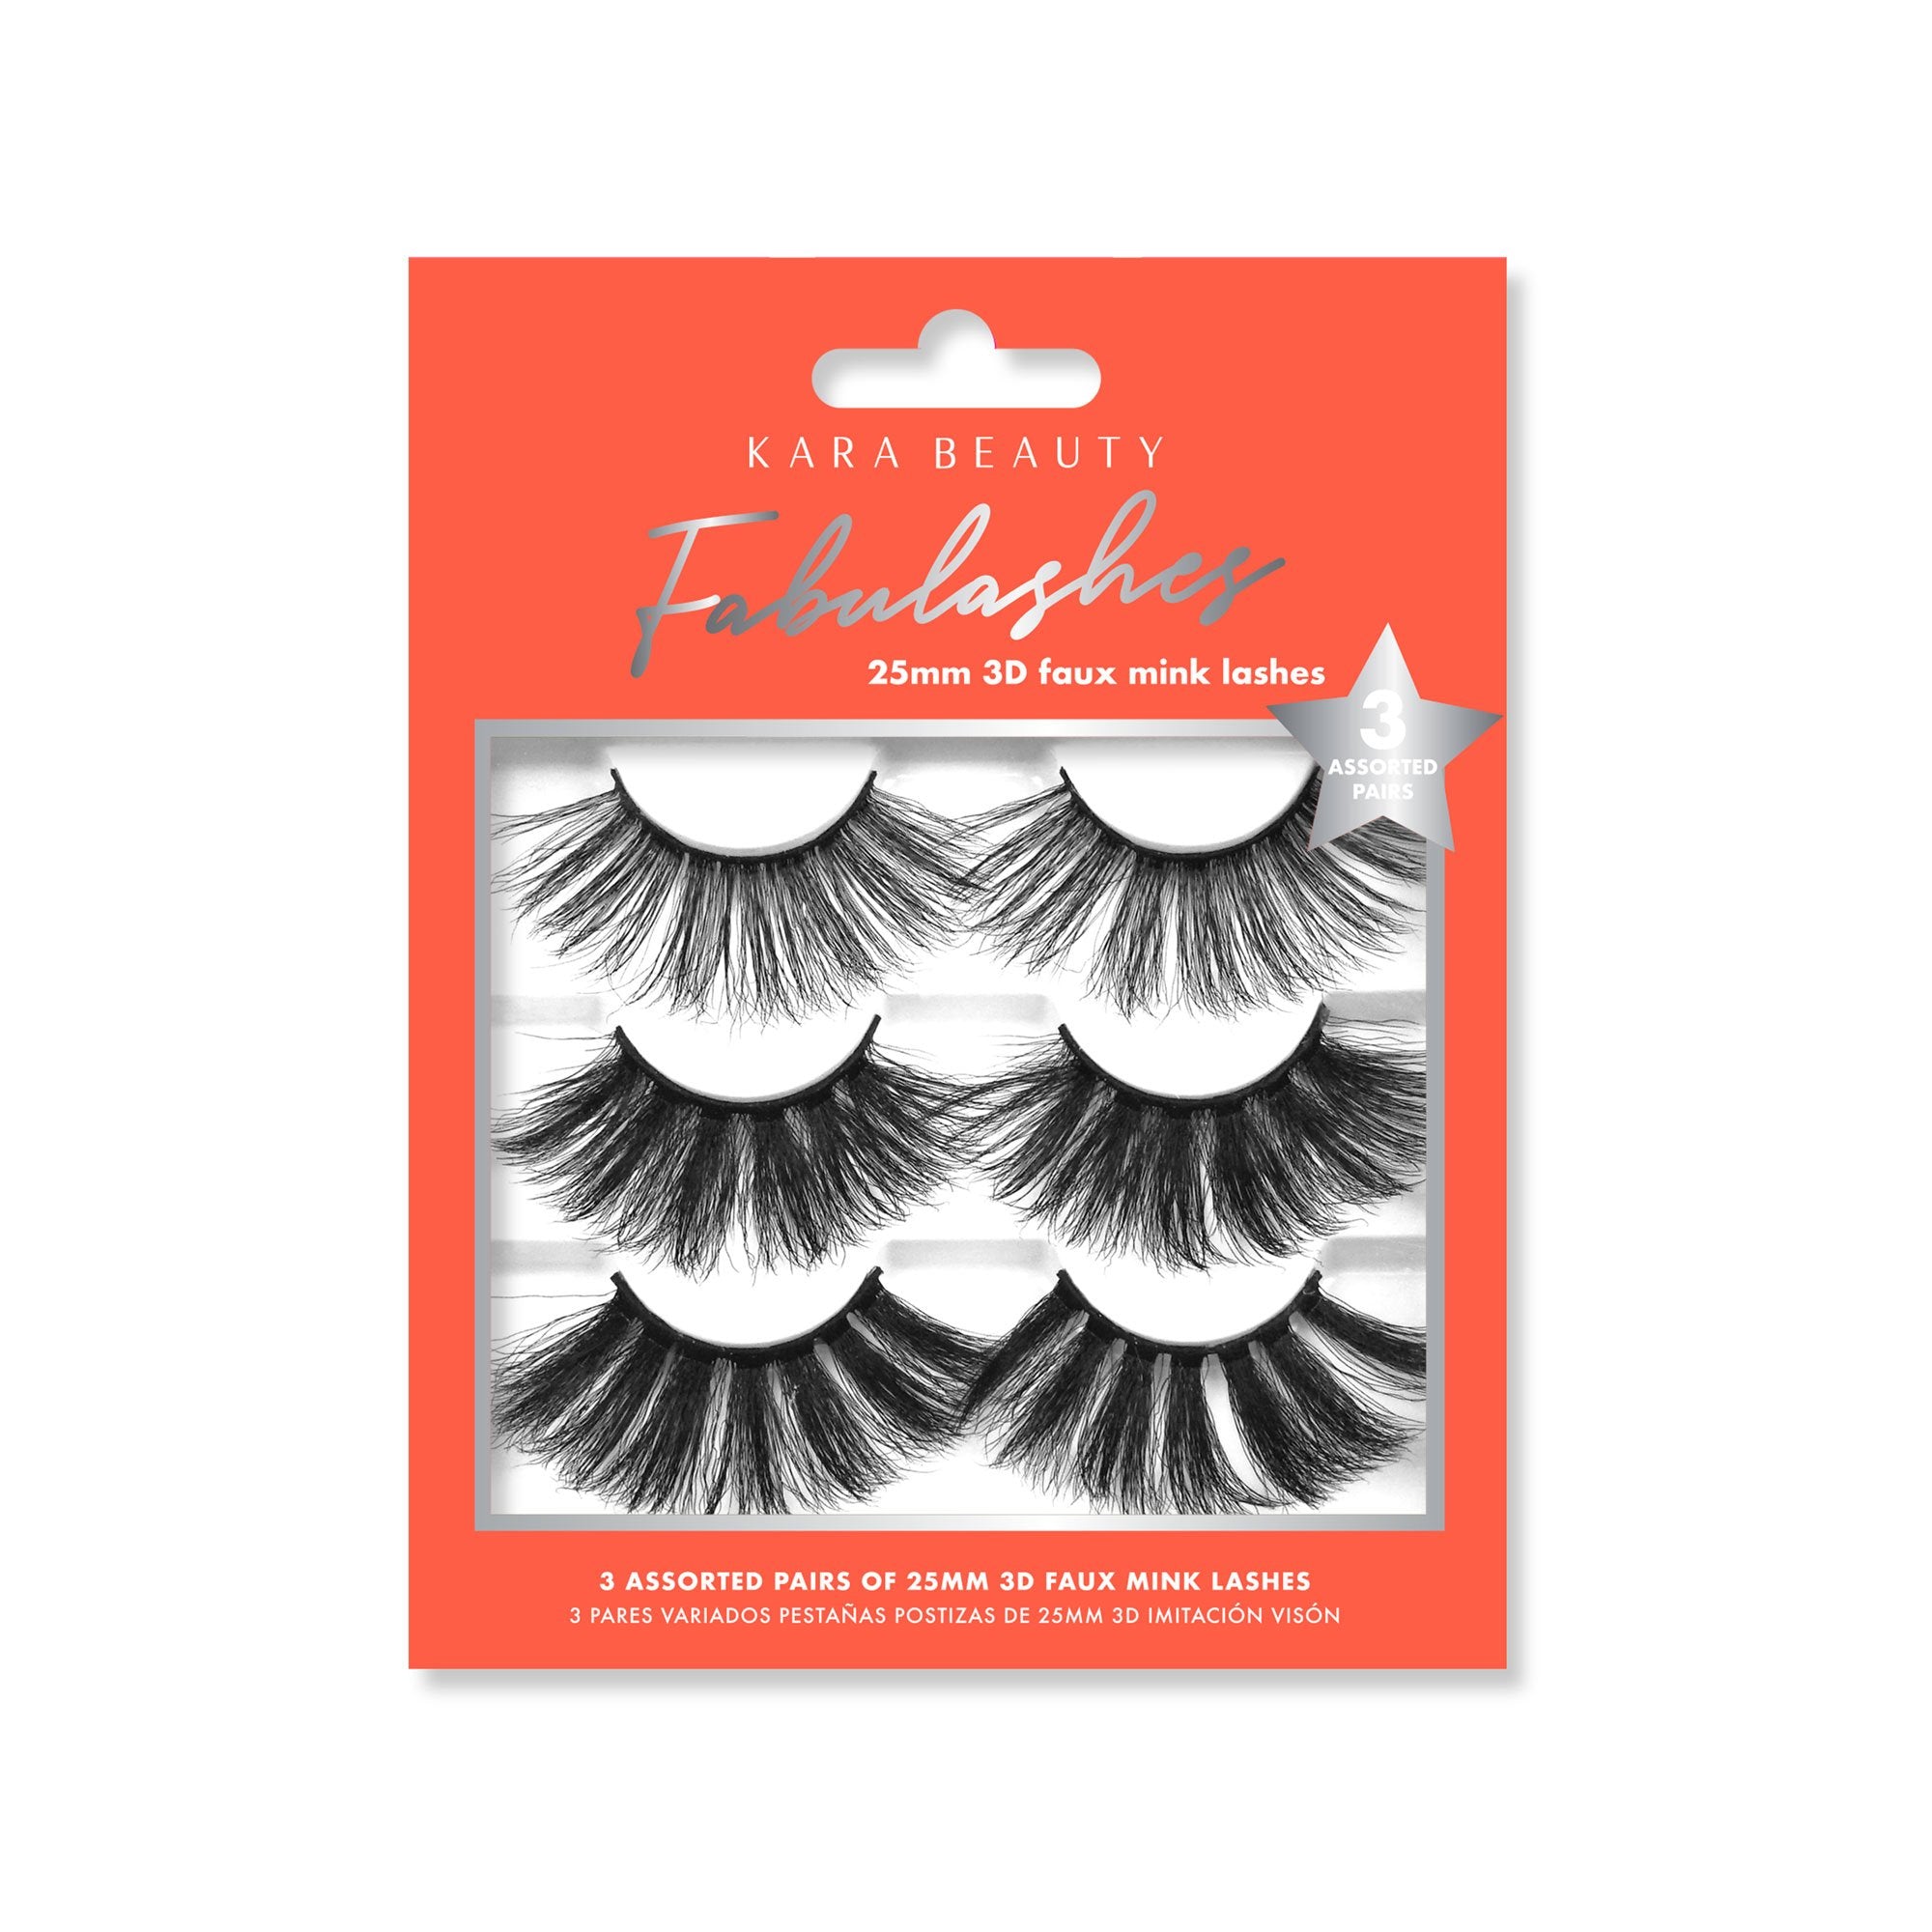 Kara Beauty Style KM3209 25MM 3D Faux Mink Lashes 3 Assorted Pairs